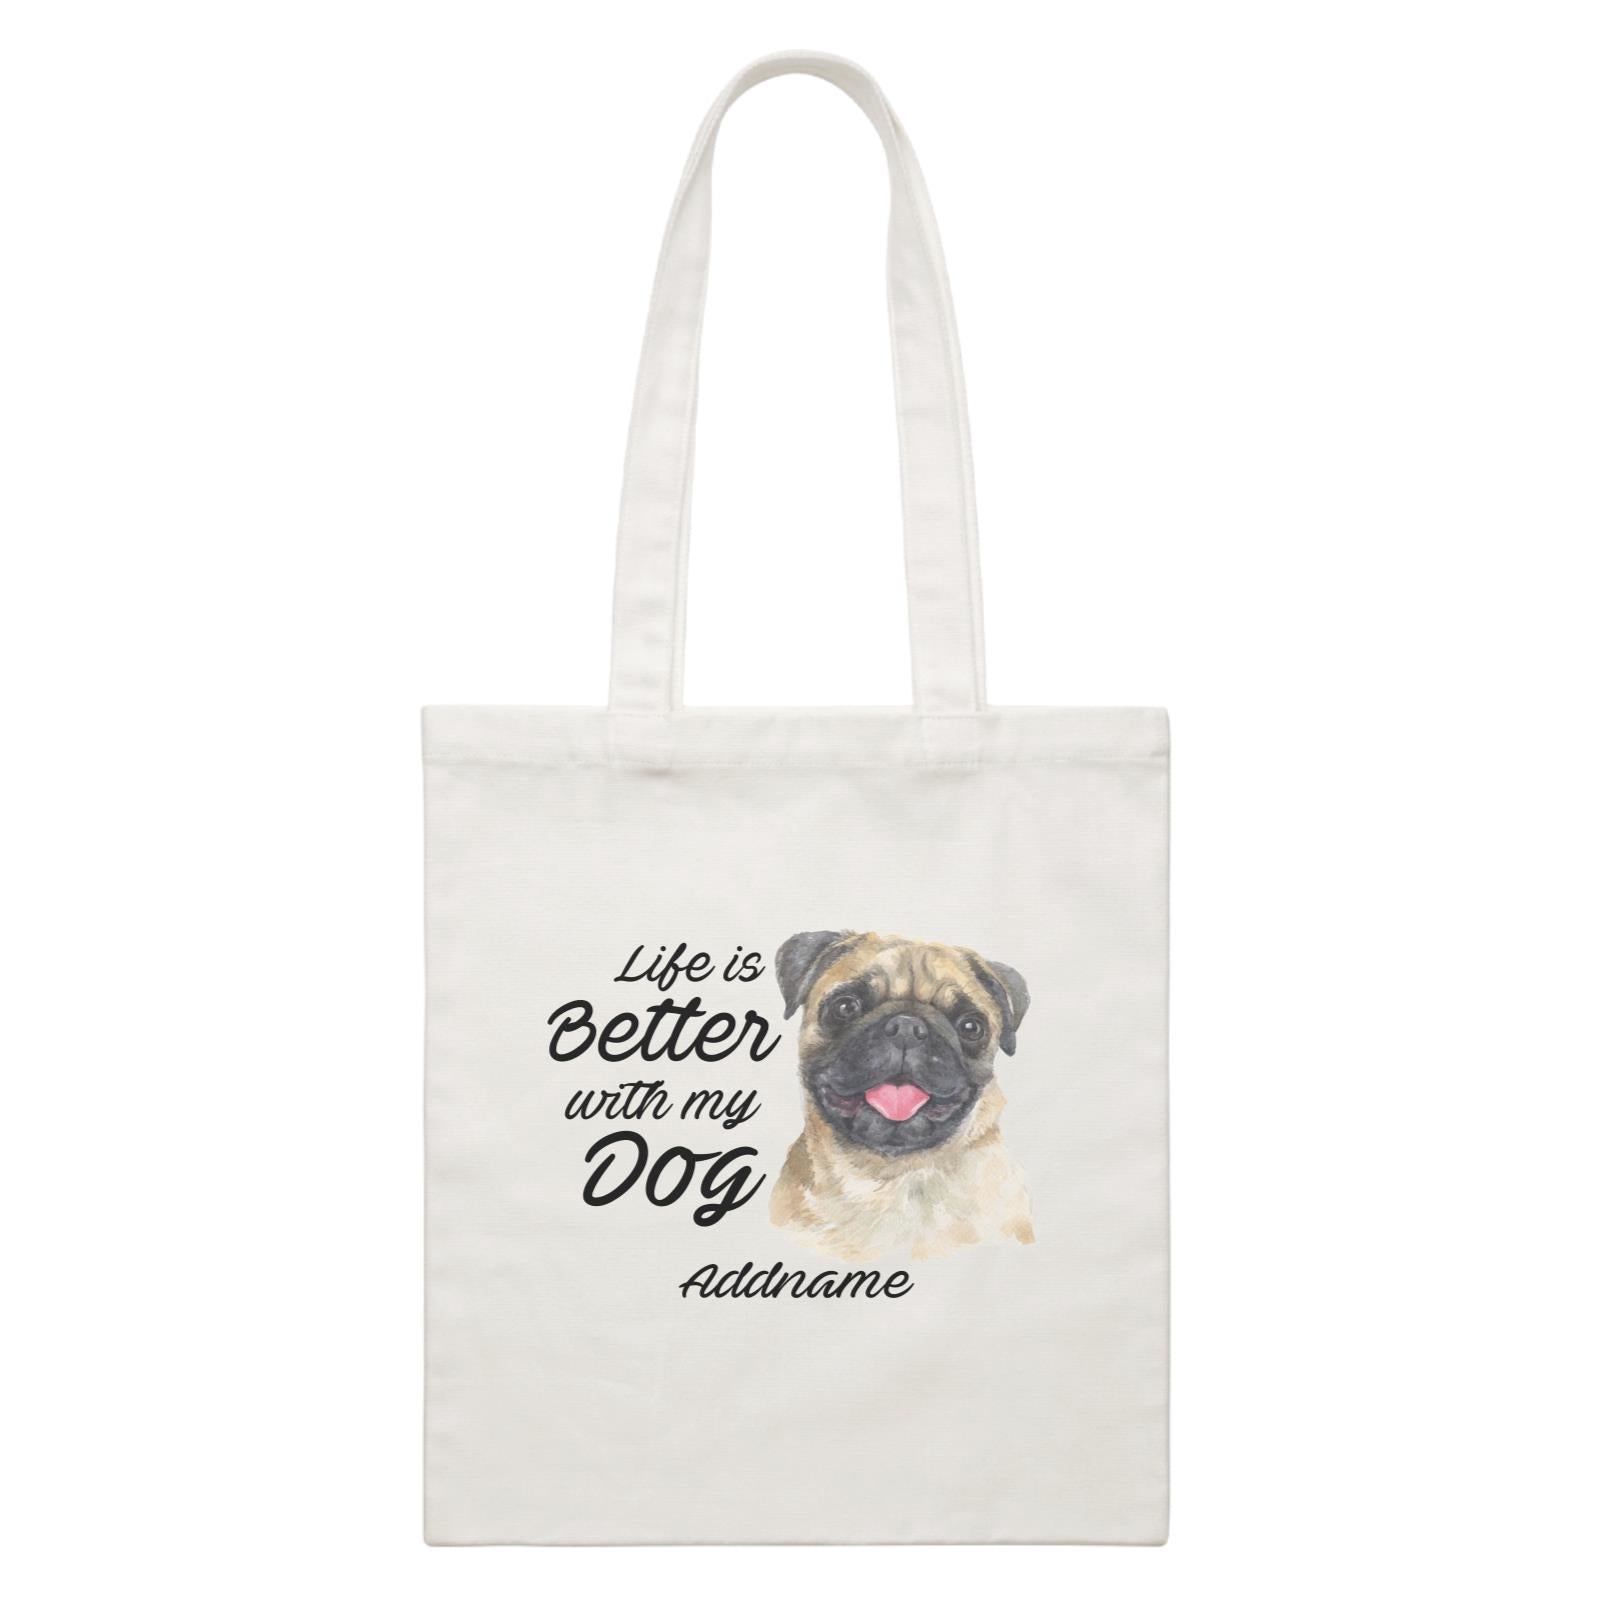 Watercolor Life is Better With My Dog Pug Addname White Canvas Bag